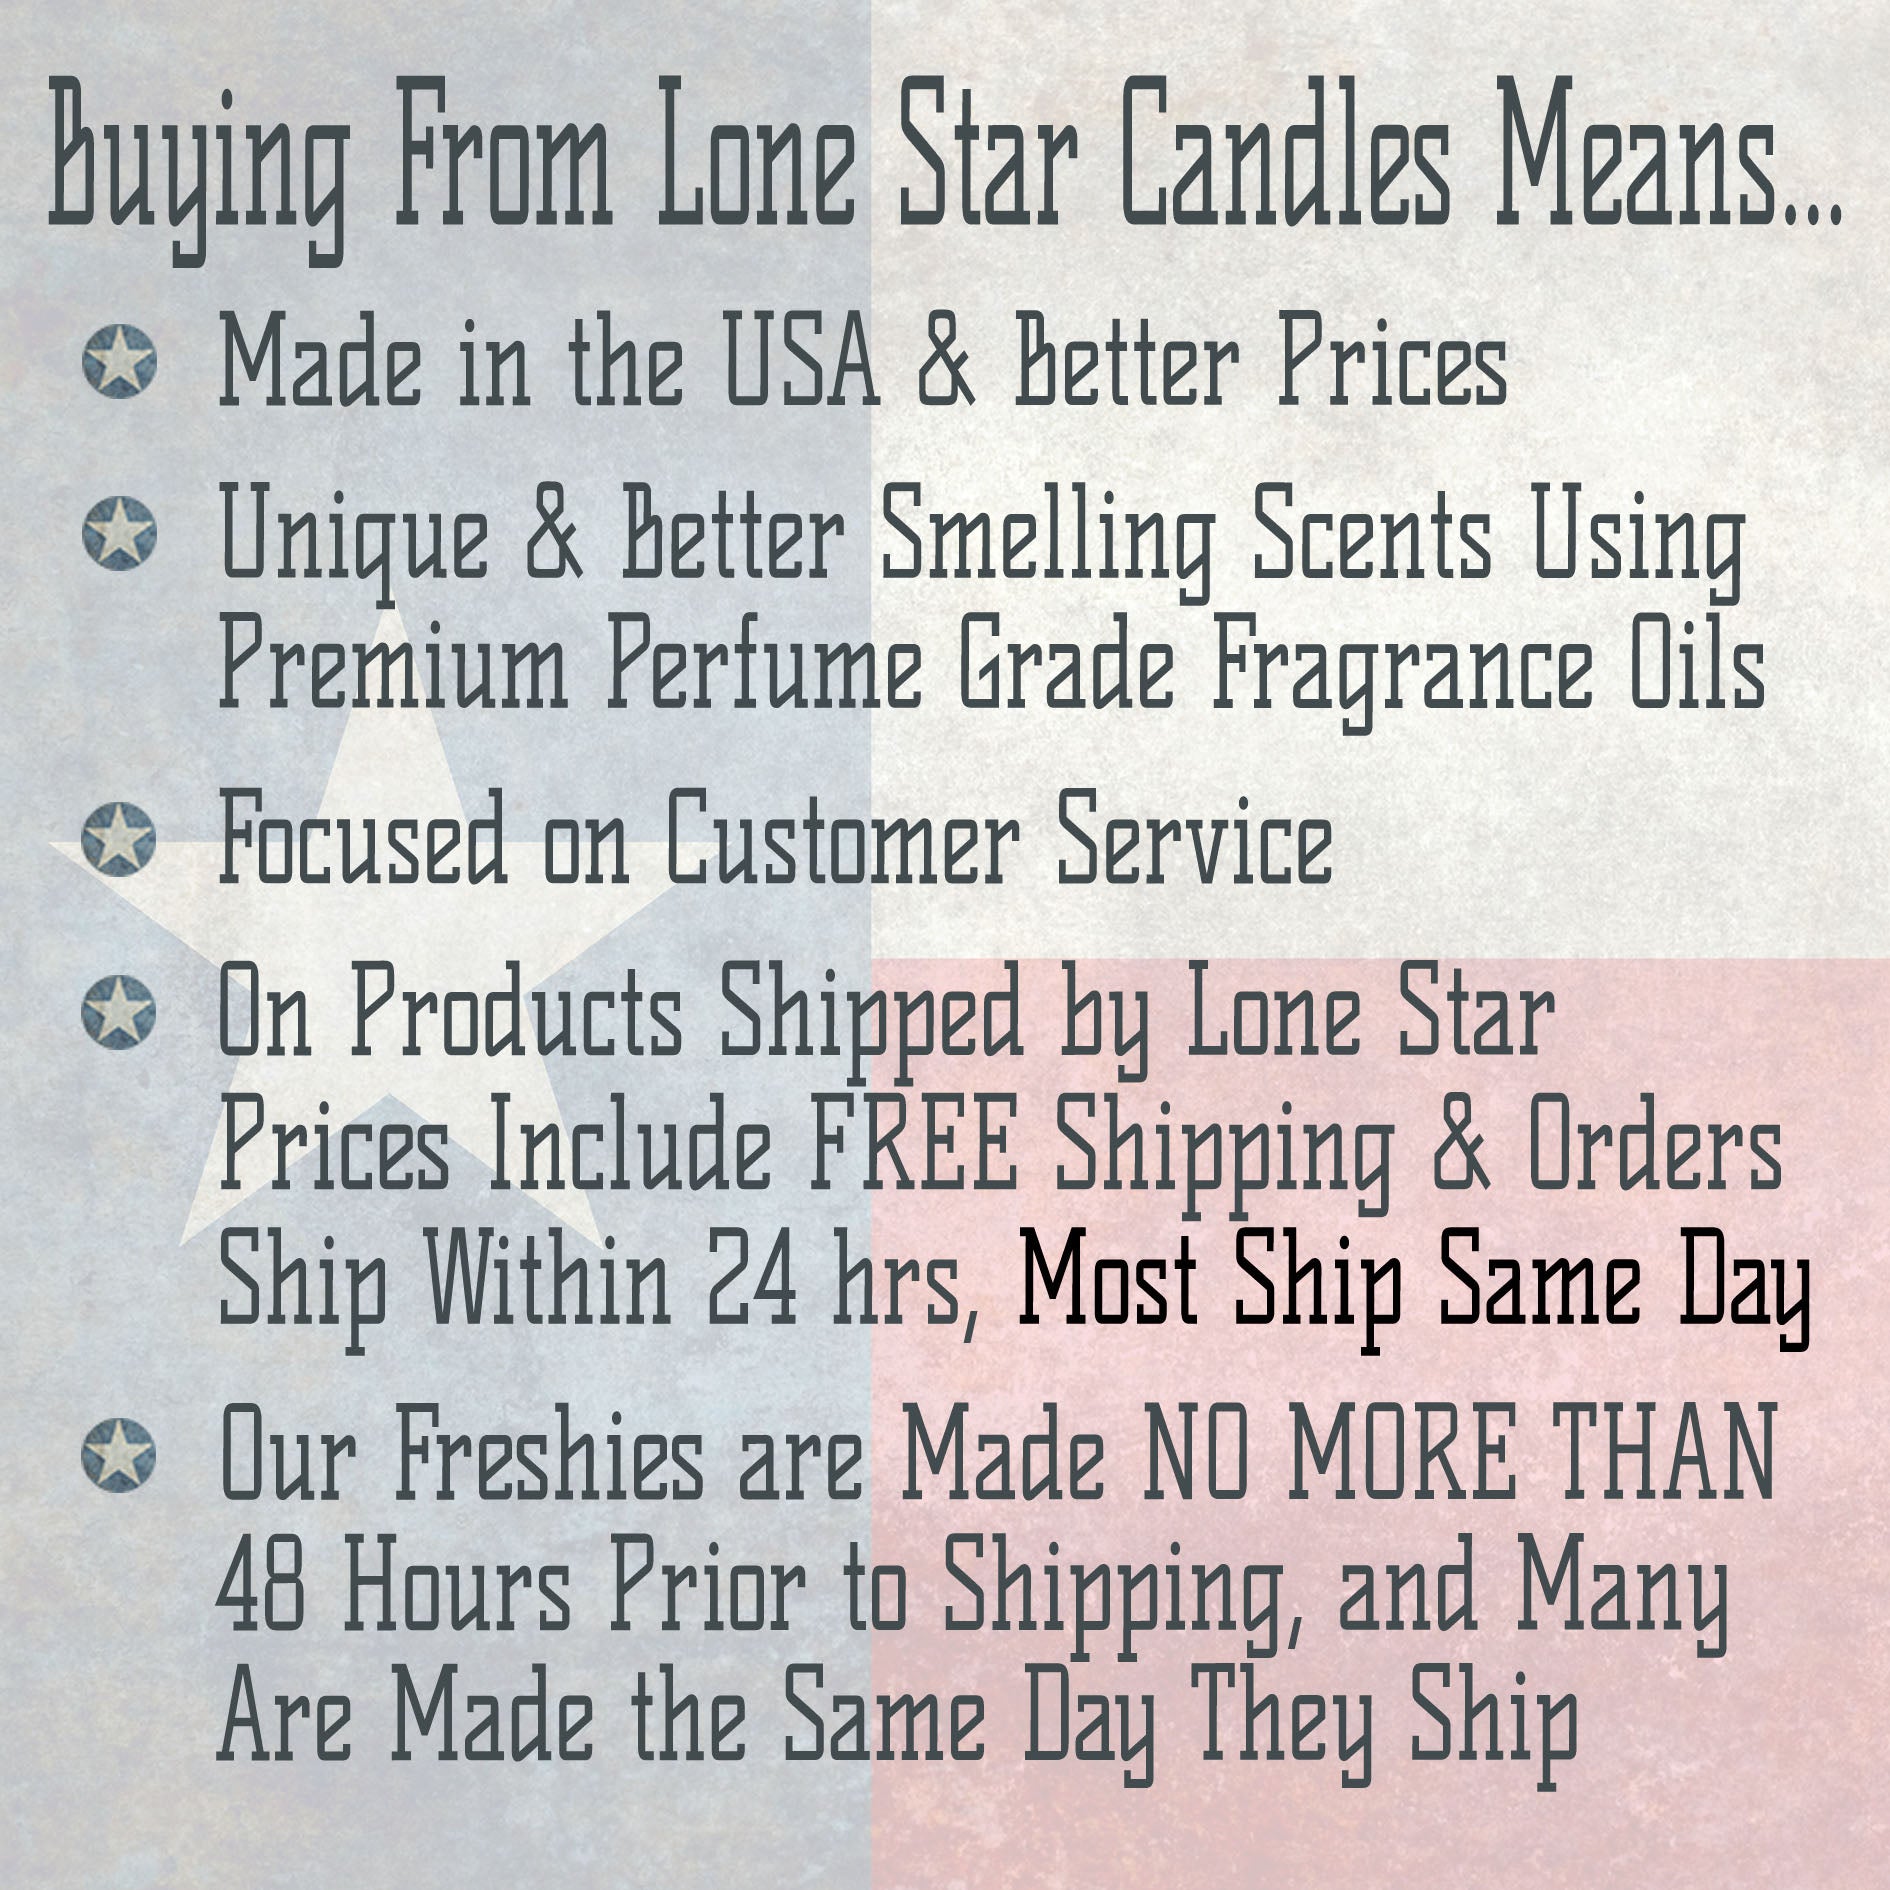 Red Hot Cinnamon, Lone Star Candles & More's Premium Strongly Scented Freshies, Red Hot Candy Like in the Theatre, Car & Air Freshener, USA Made in Texas, TX Cowhide 1-Pack